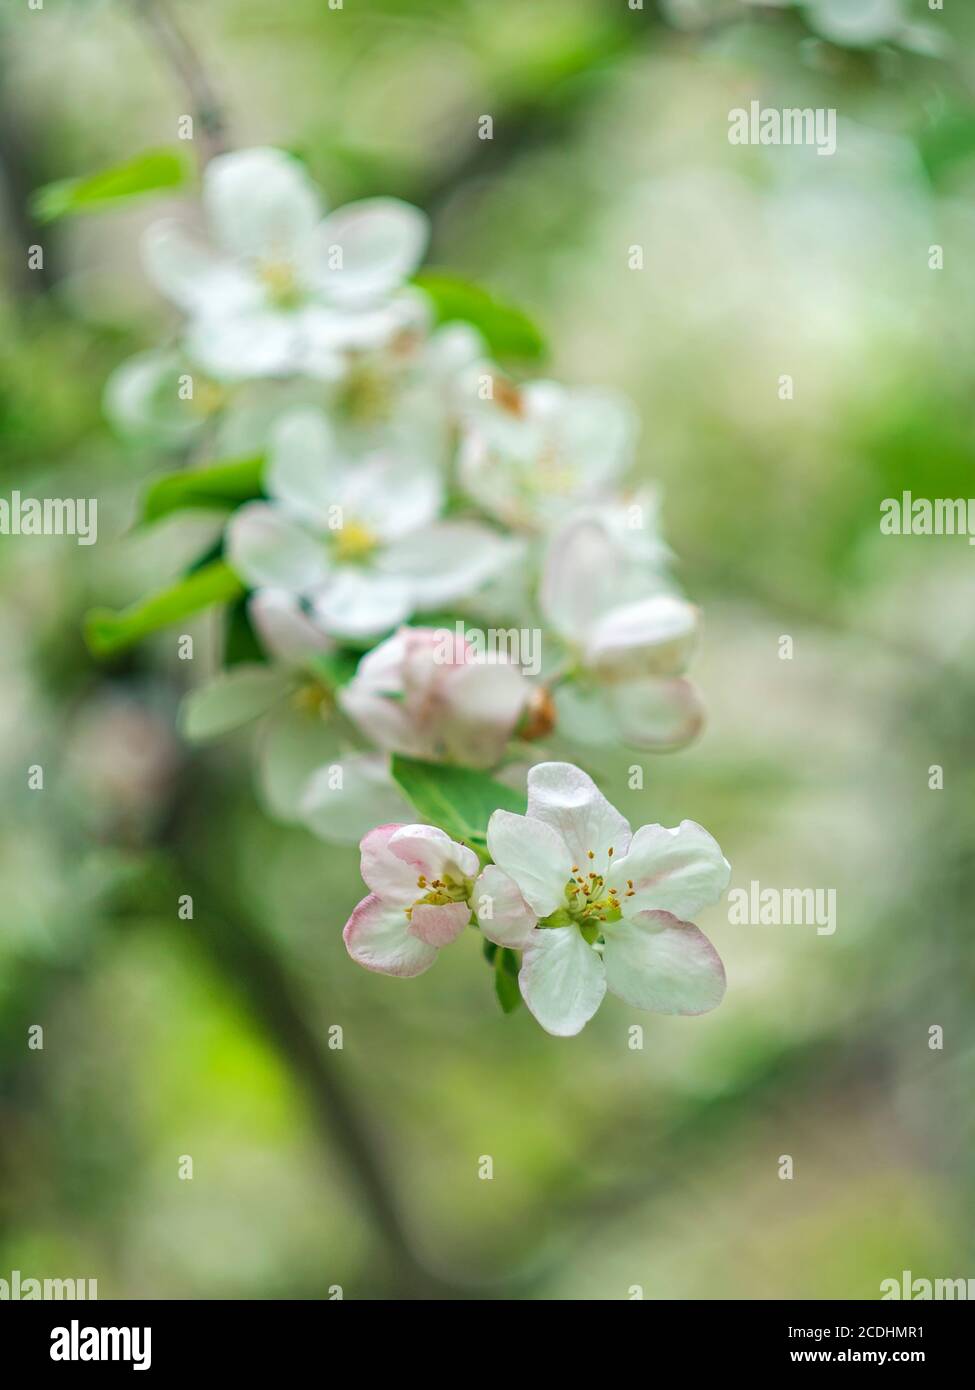 Blooming apple tree. Spring flowering trees. Macro flowers on a vintage Helios lens. Selective focus. Can be used for greeting card. Stock Photo